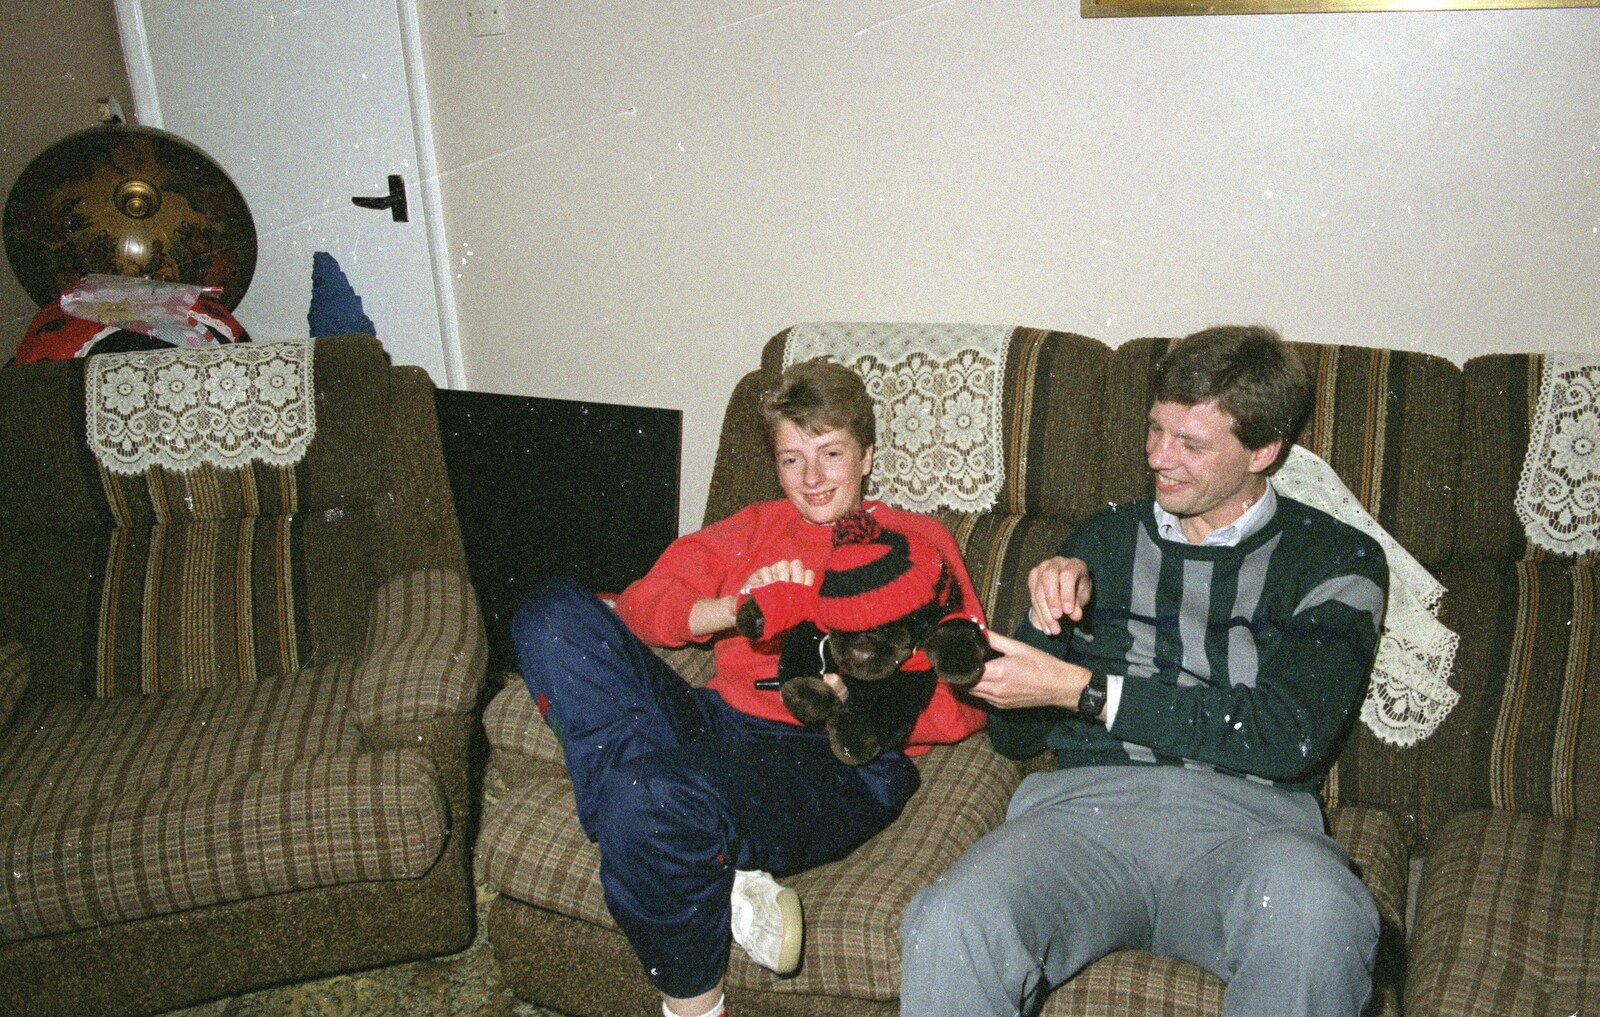 Theresa, Steve-O and a toy gorilla from An "Above The Laundrette" Barbeque, Diss, Norfolk - 28th May 1990